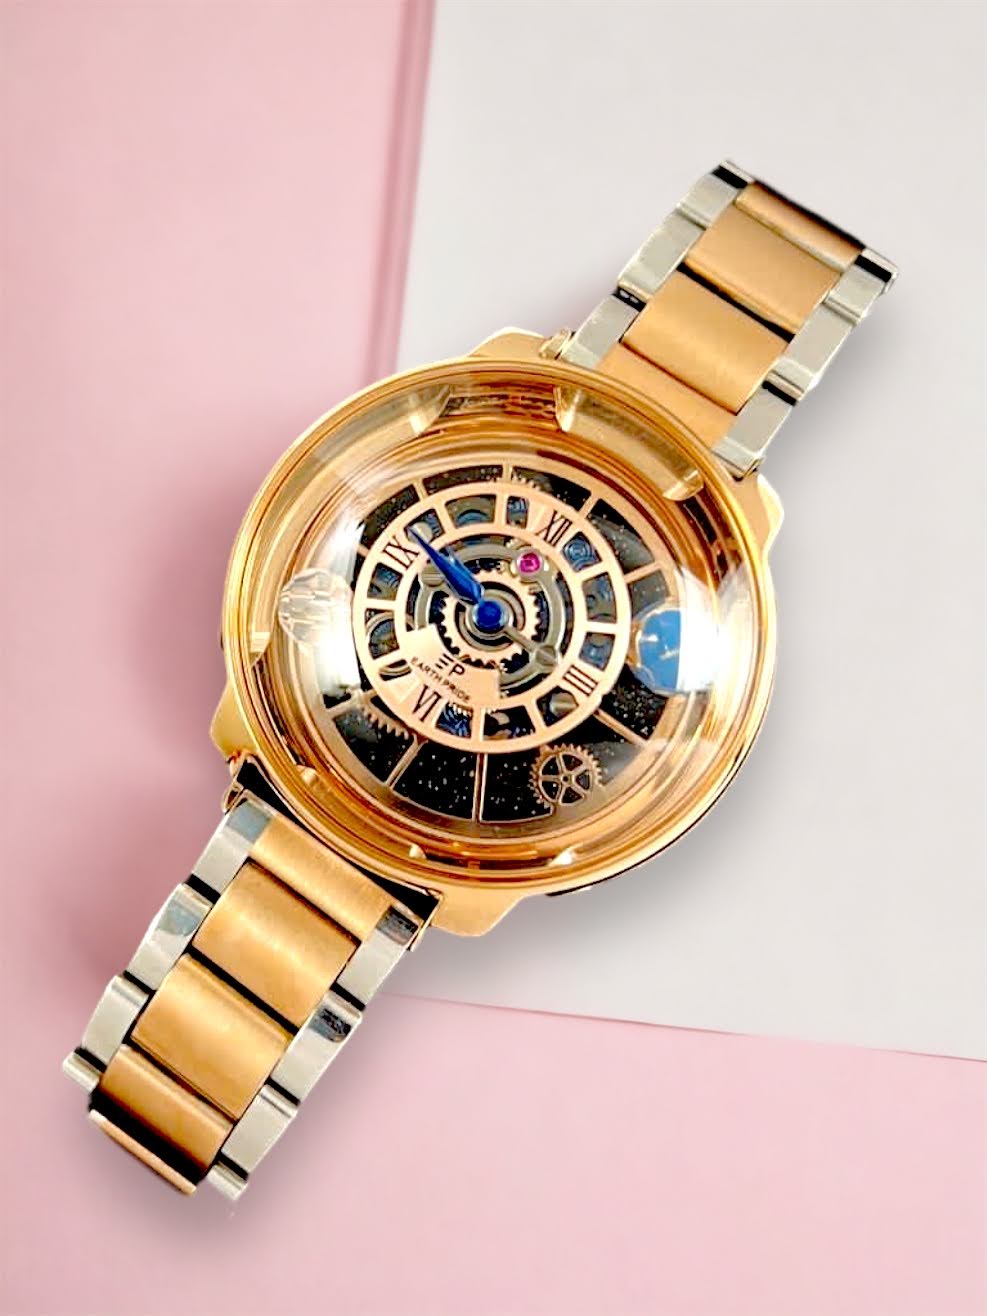 Discover the Rare and Exclusive Earth Pride Unisex Quartz women’s Watch - the Ultimate Symbol of Luxury